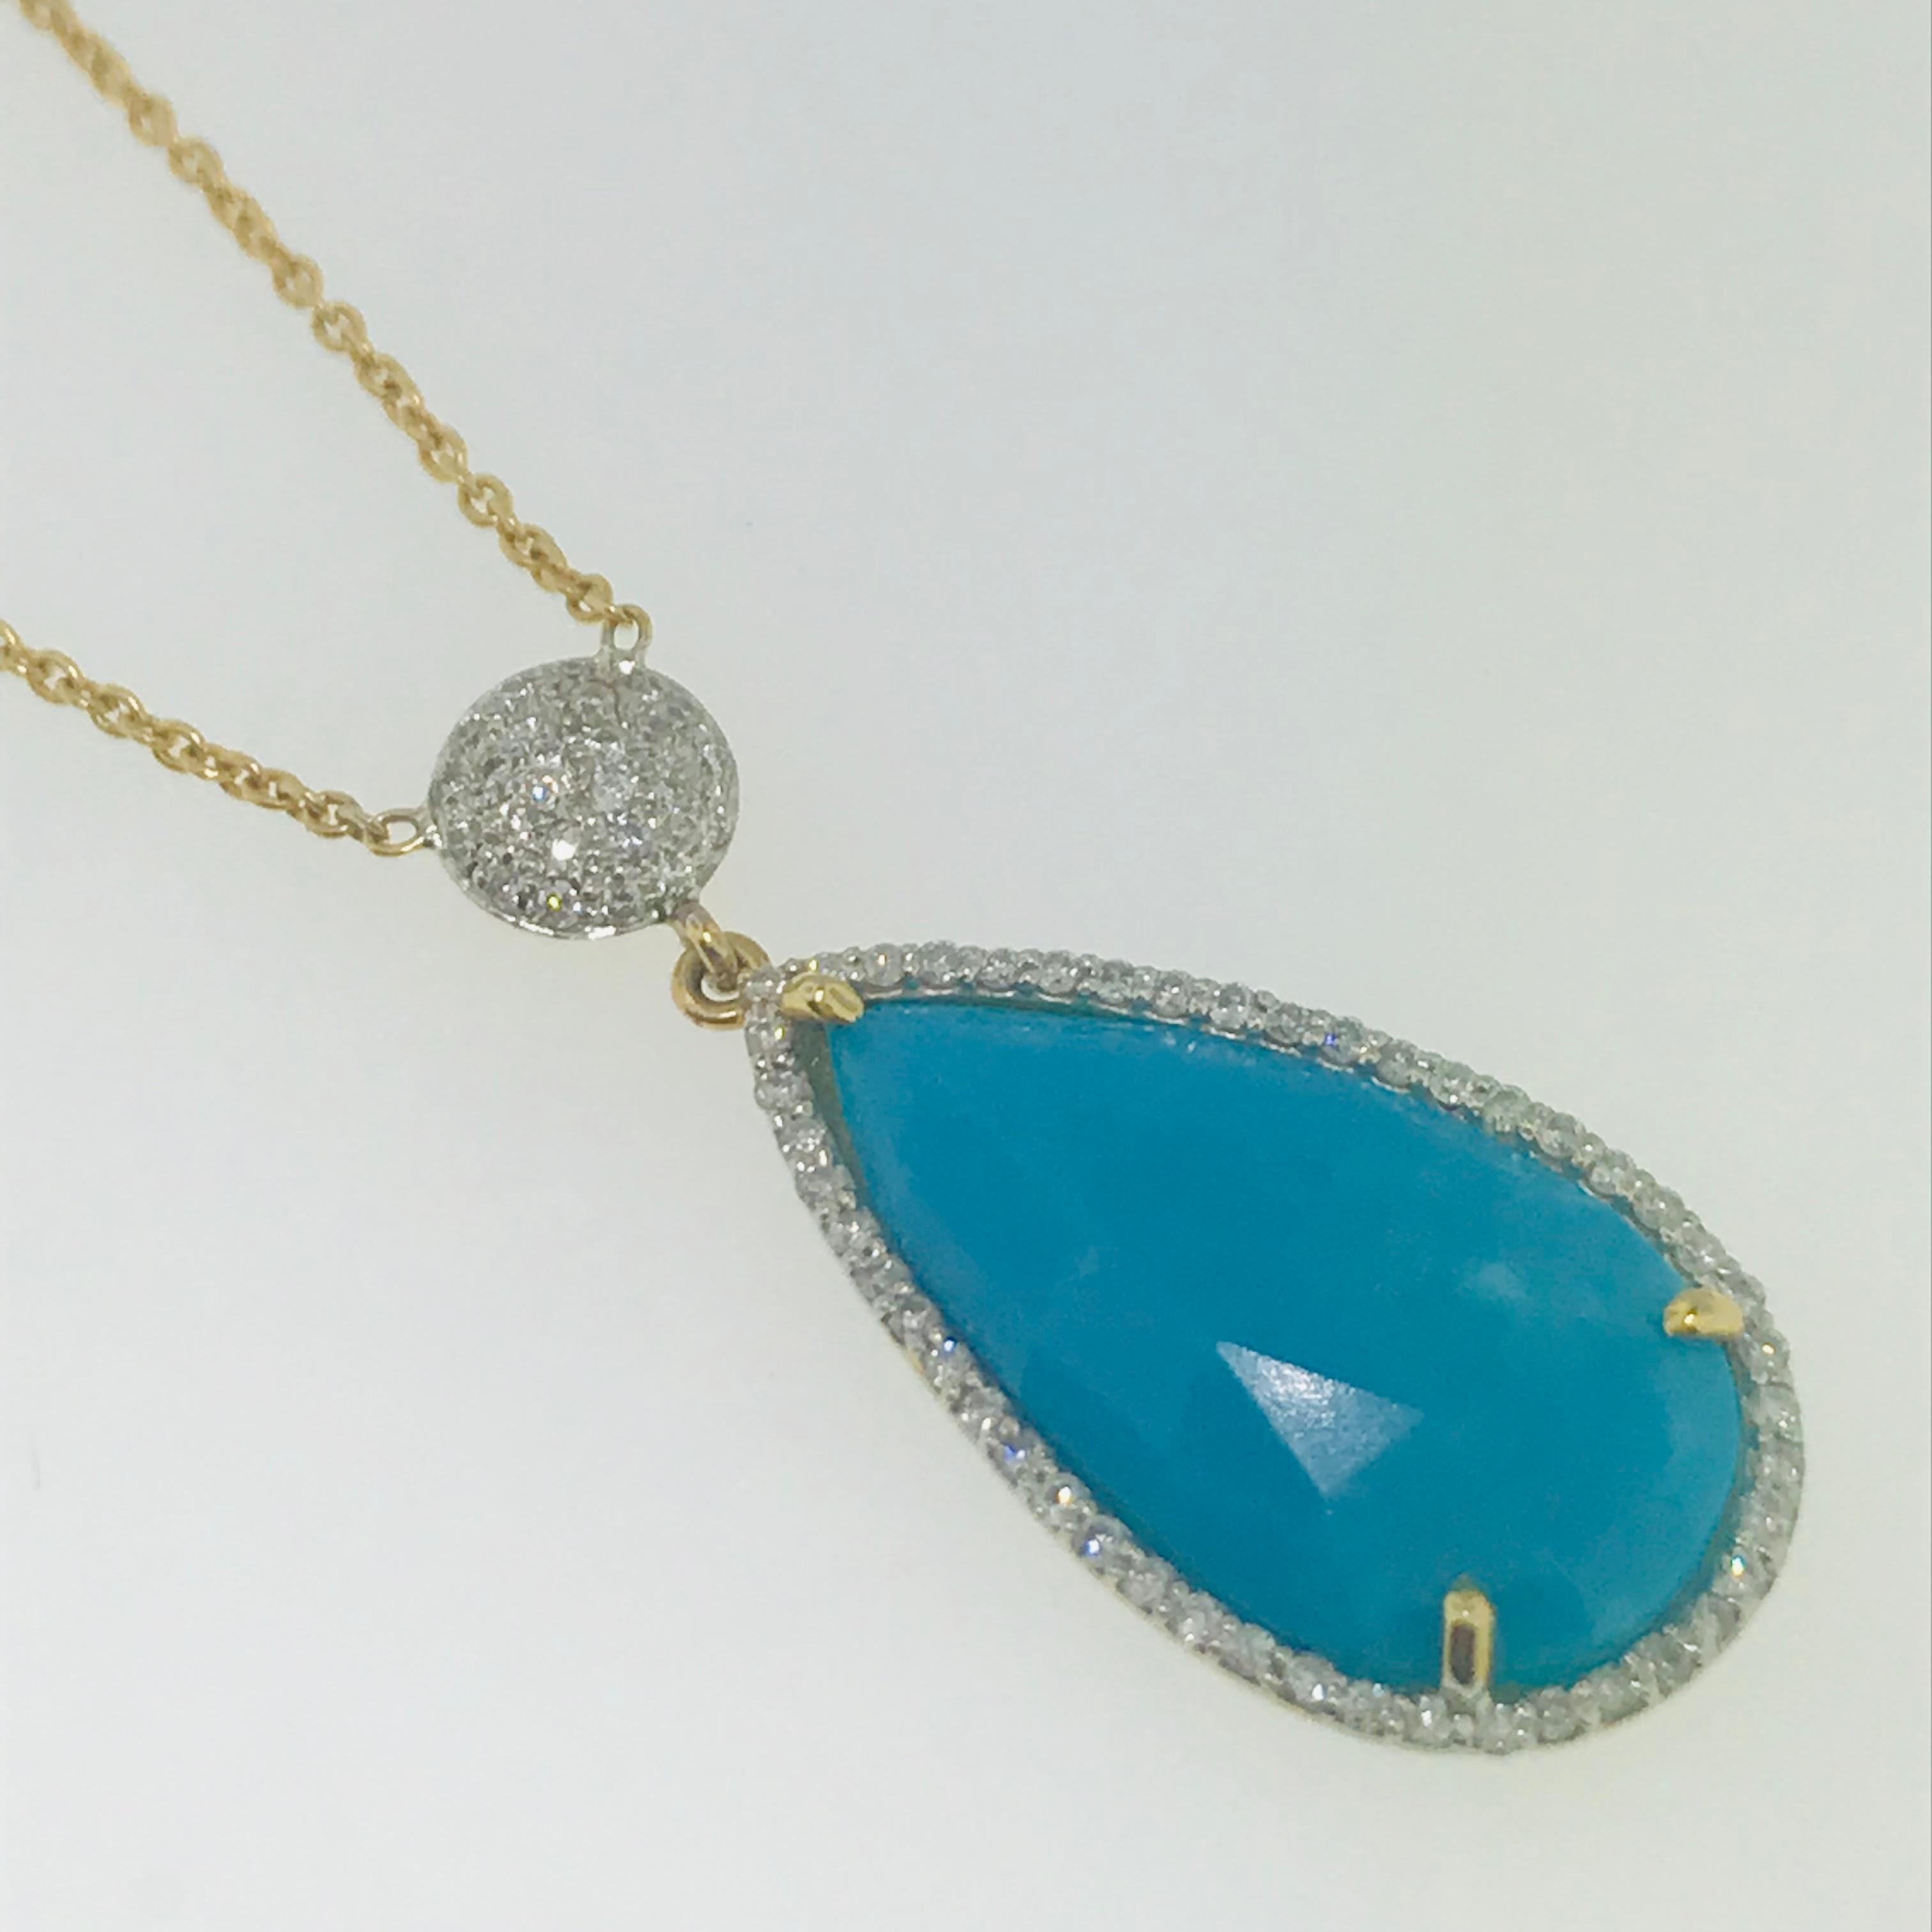 Turquoise and Diamond Cluster Necklace in beautiful 18 karats yellow gold -Original. This original piece is essential! This design highlights a genuine Persian turquoise from the mines of Iran. These stones sourced from Iran tend to be much harder